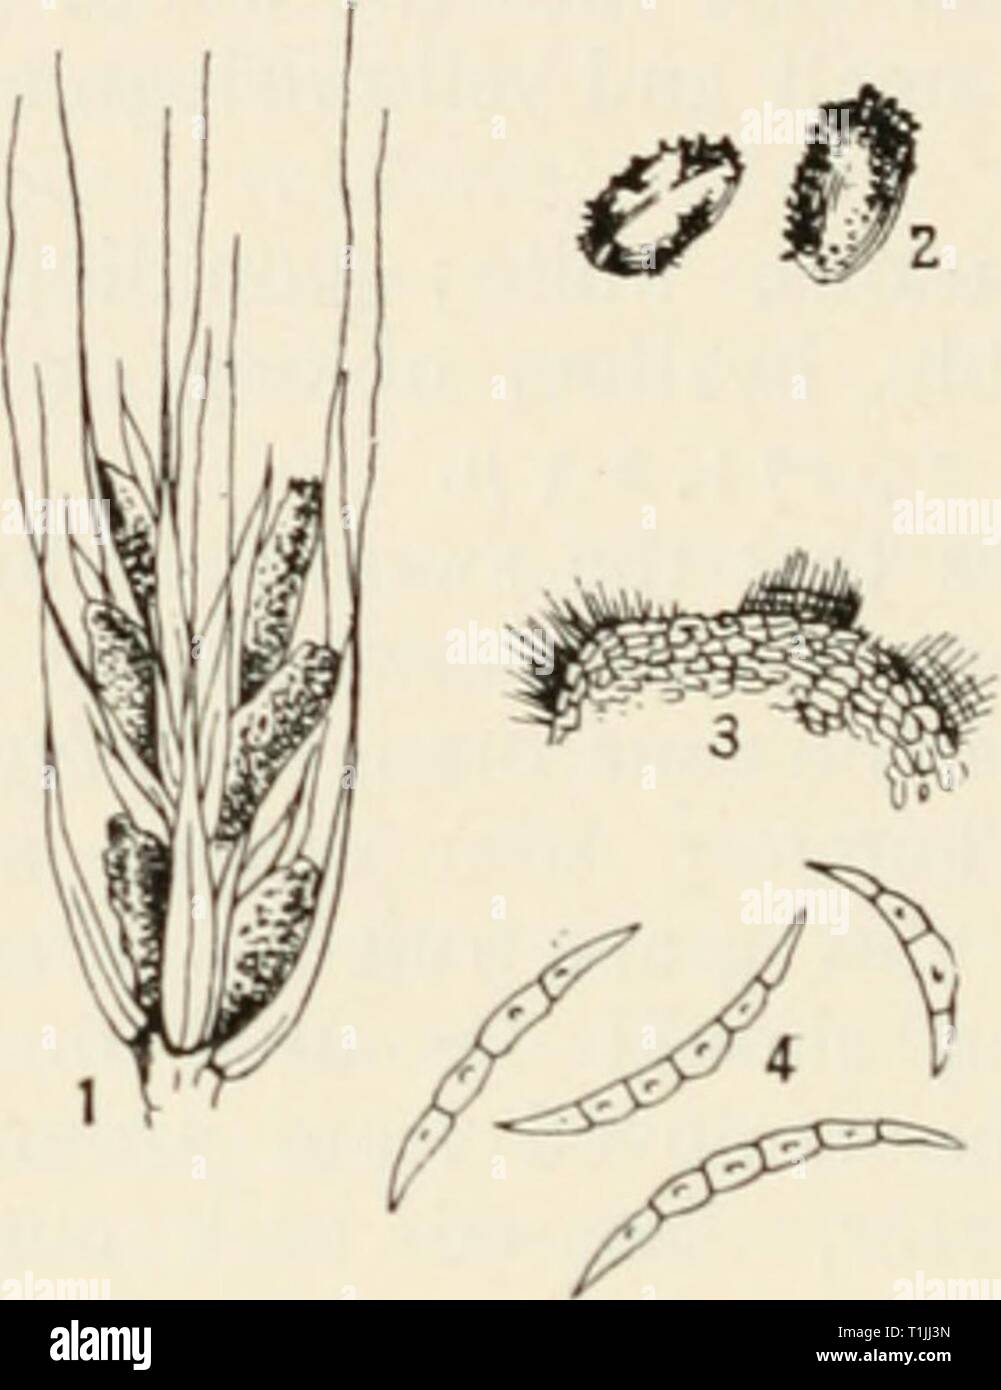 Diseases of cultivated plants and Diseases of cultivated plants and trees  diseasesofcultiv00massuoft Year: [1910?]  494 DISEASES OF CULTIVATED PLANTS Spore - mass subgelatinous, deep red ; conidia fusiform, curved, 3-5-septate at maturity. Clean seed obtained from a district free from the disease should be sown. There is also a danger of infection from the presence of wild grasses. Yx2iVi,Jahrb. d. Deutsch. Landwirt/i. GeselL, 1892. Matthews,yi'wr/z. Roy. Mor. Soc, 1883, p. 321. Smith, Diseases of Field and Garden Crops, p. 209.    Fig. 149.—Fusarium heterosporum. i, portion of an ear of ry Stock Photo